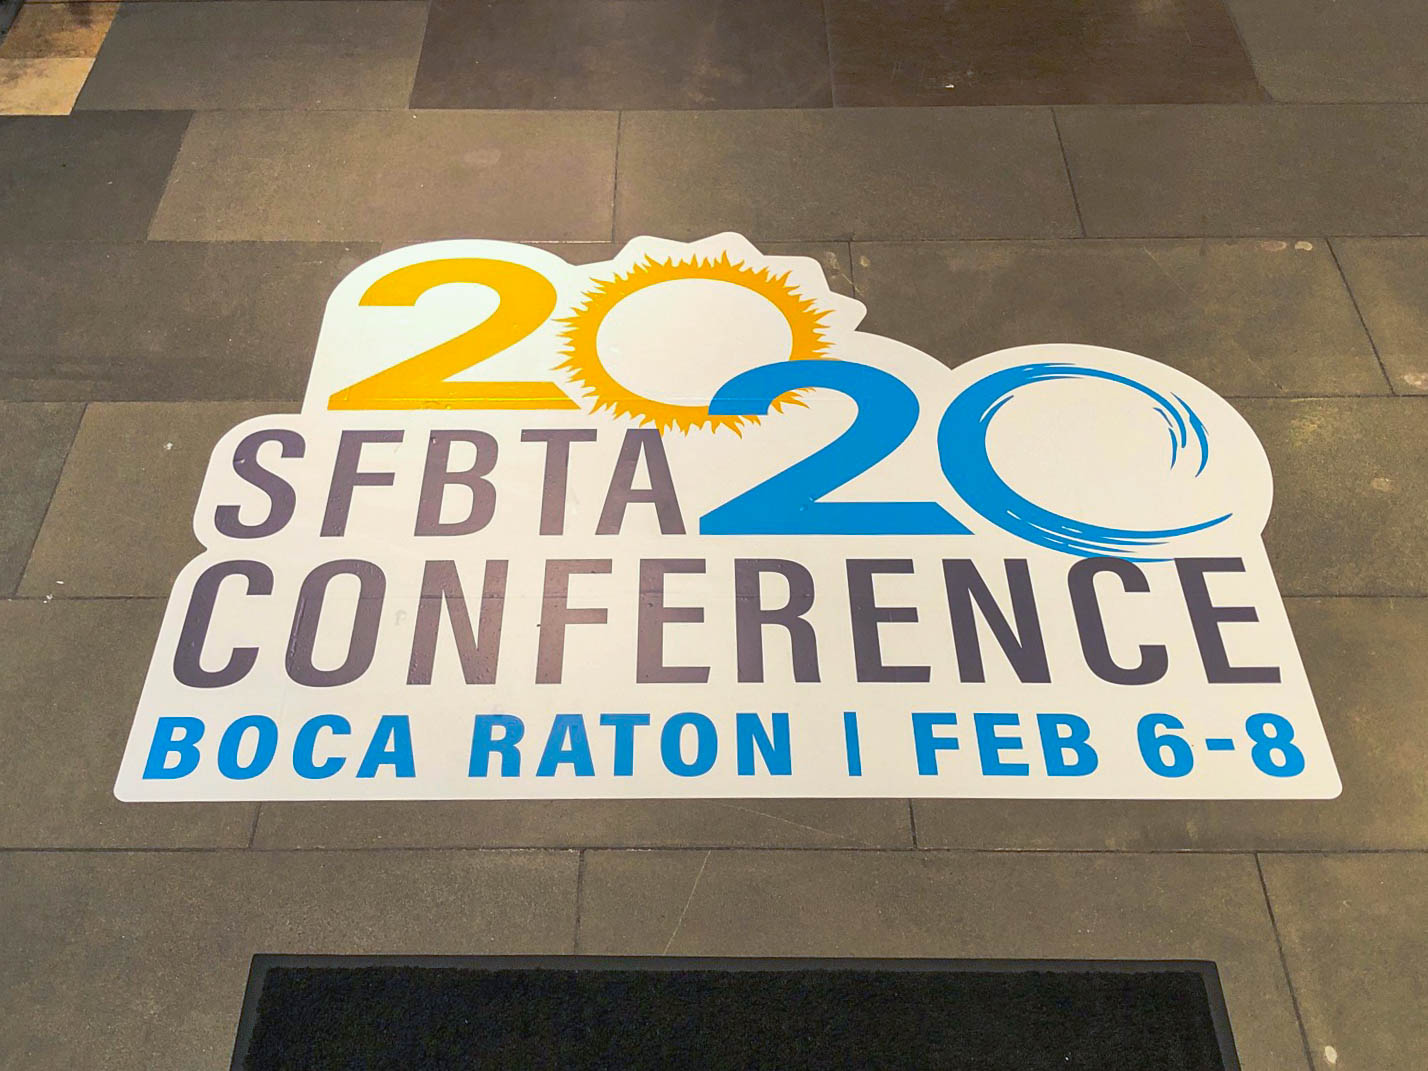 Floor Graphic for Conference in Boca Raton